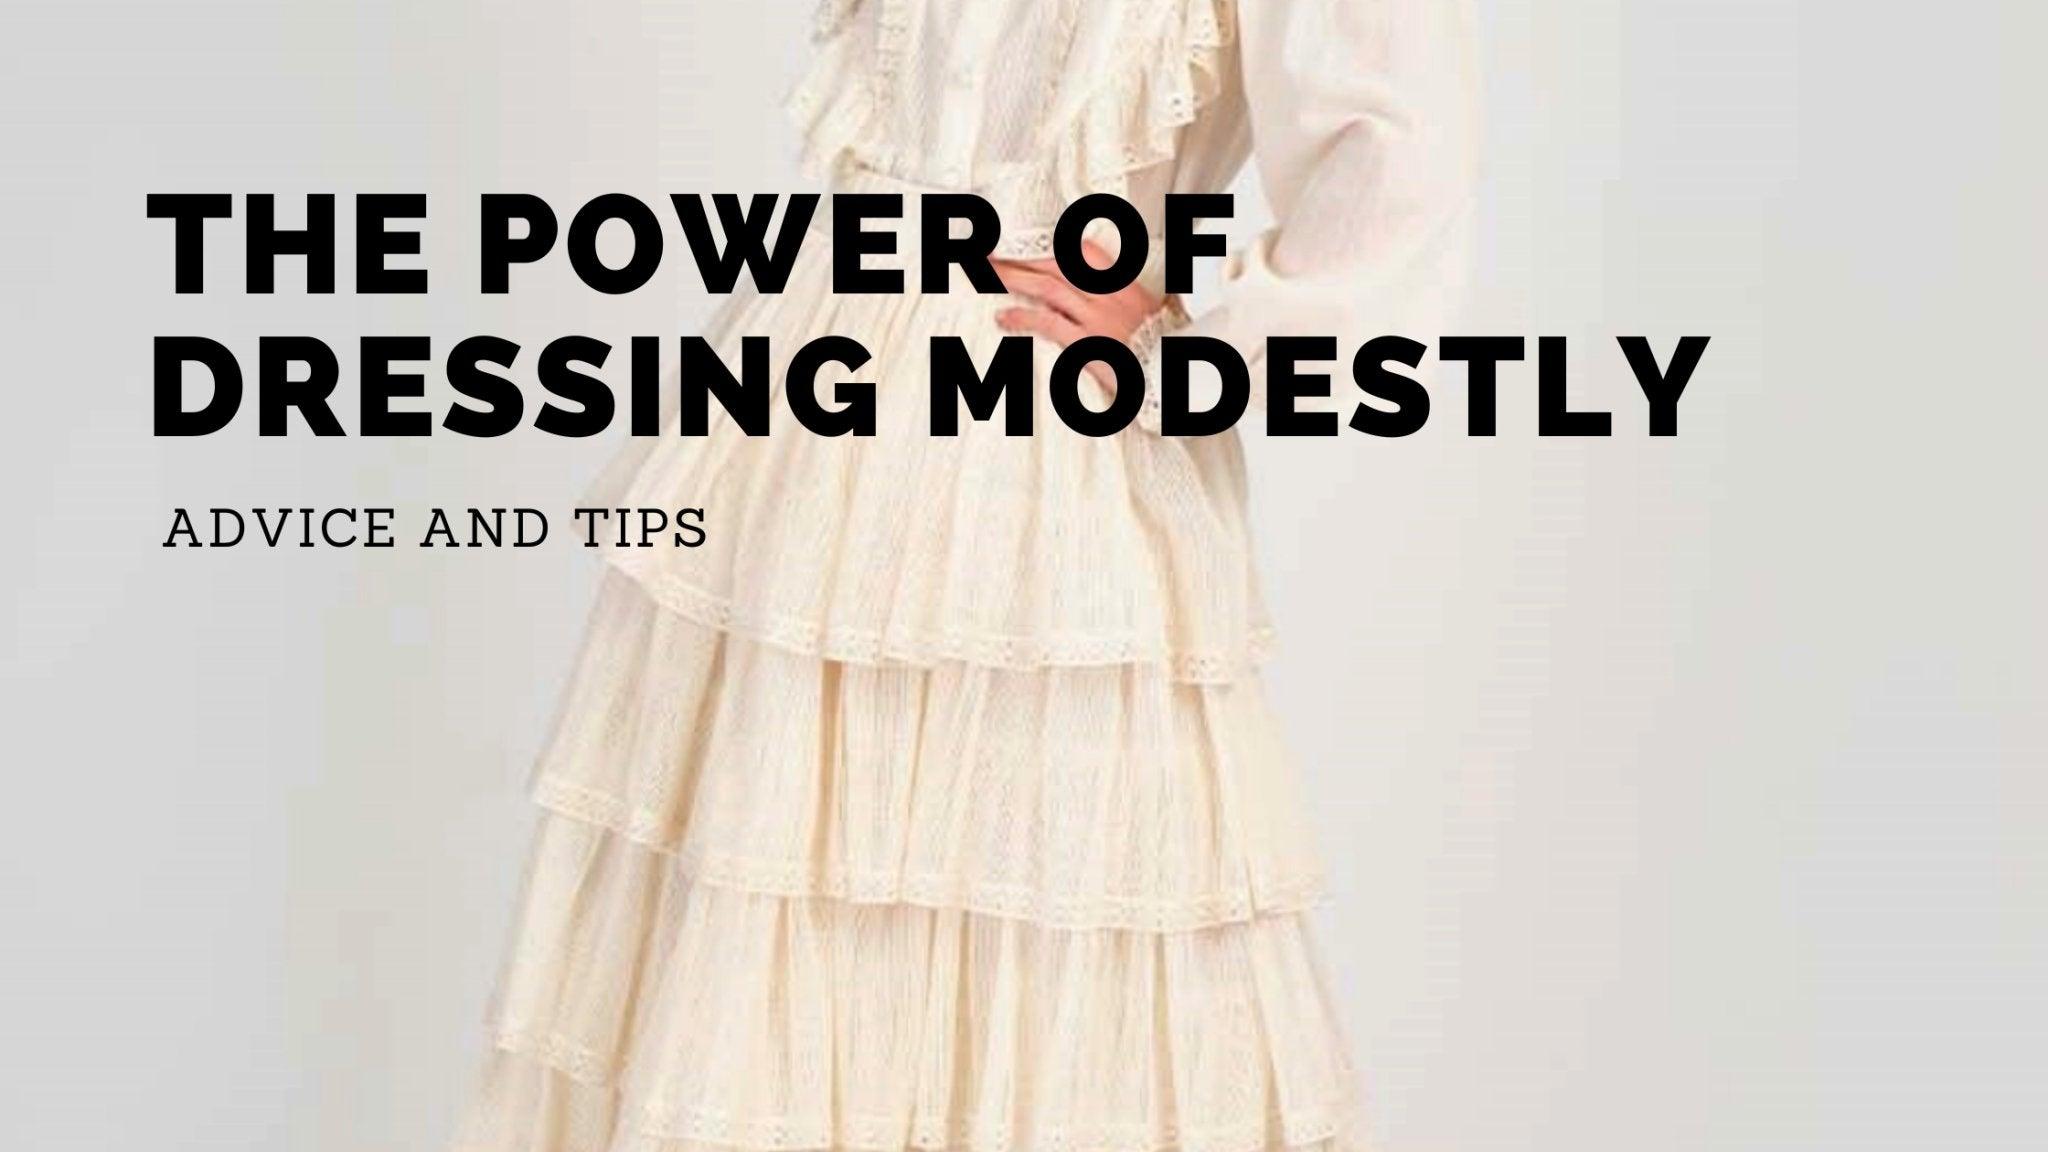 The Power of Dressing Modestly: Why More Women Are Making the Choice - By Baano